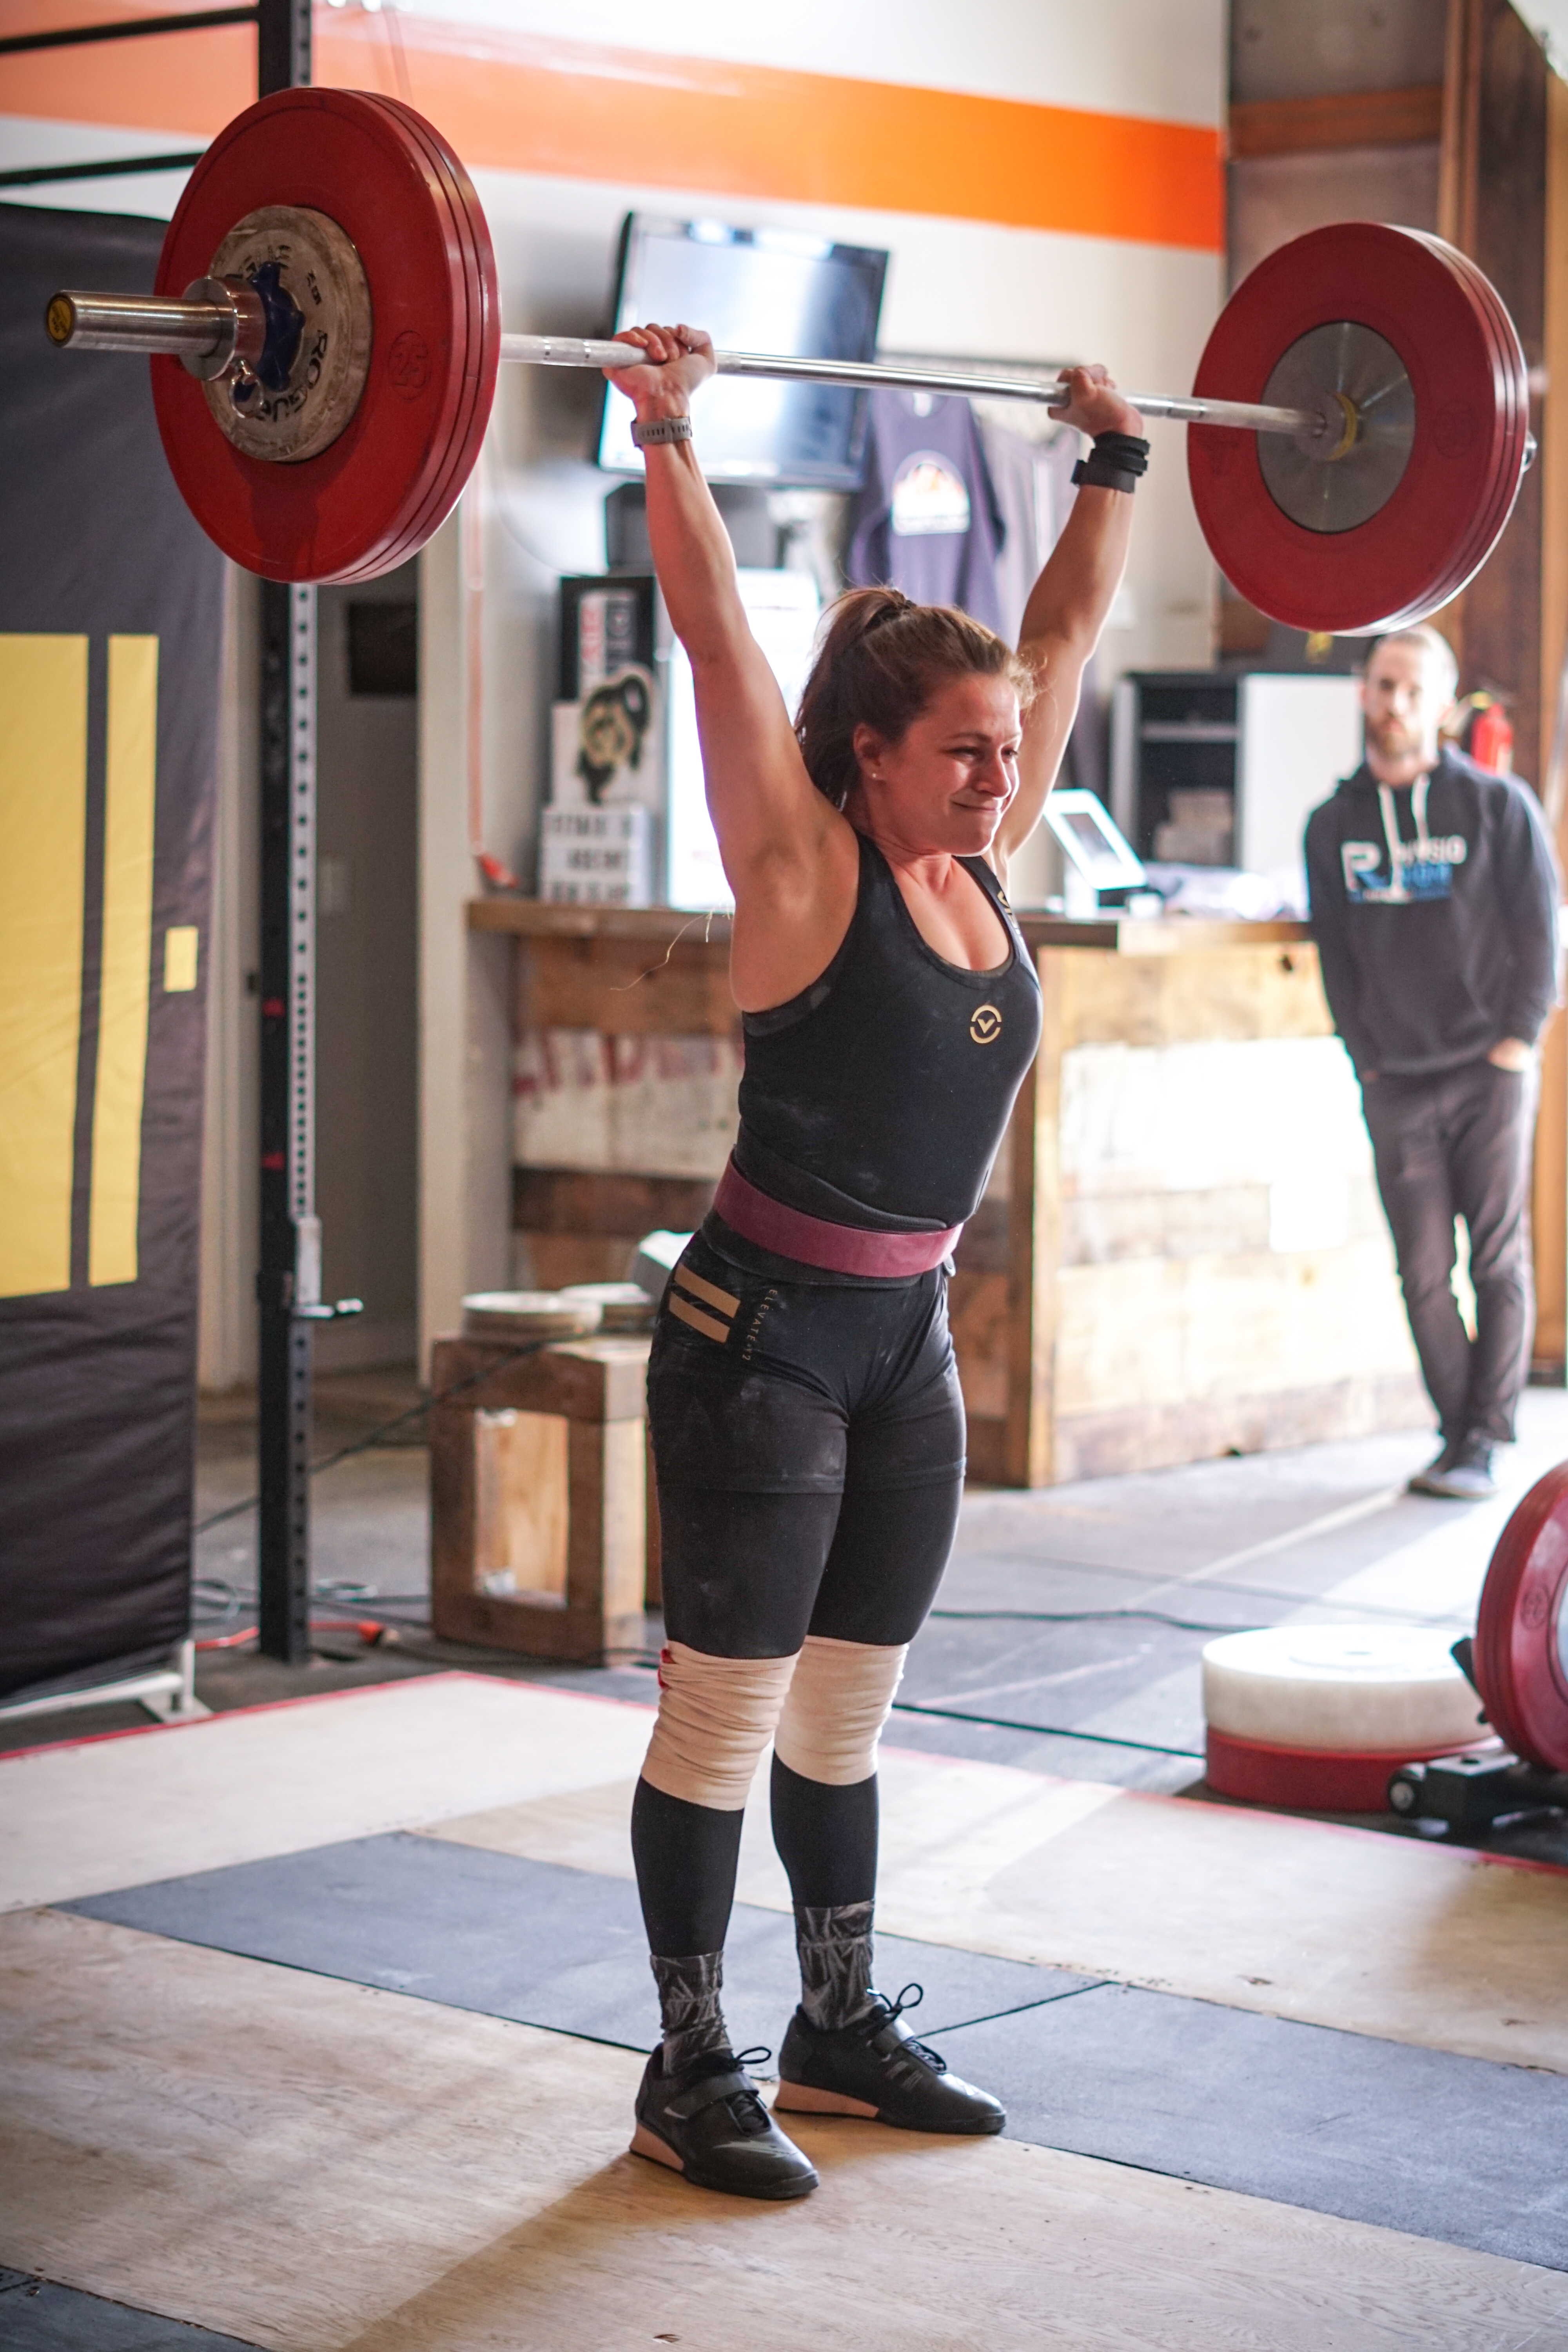 Back to Basics: Olympic Weightlifting